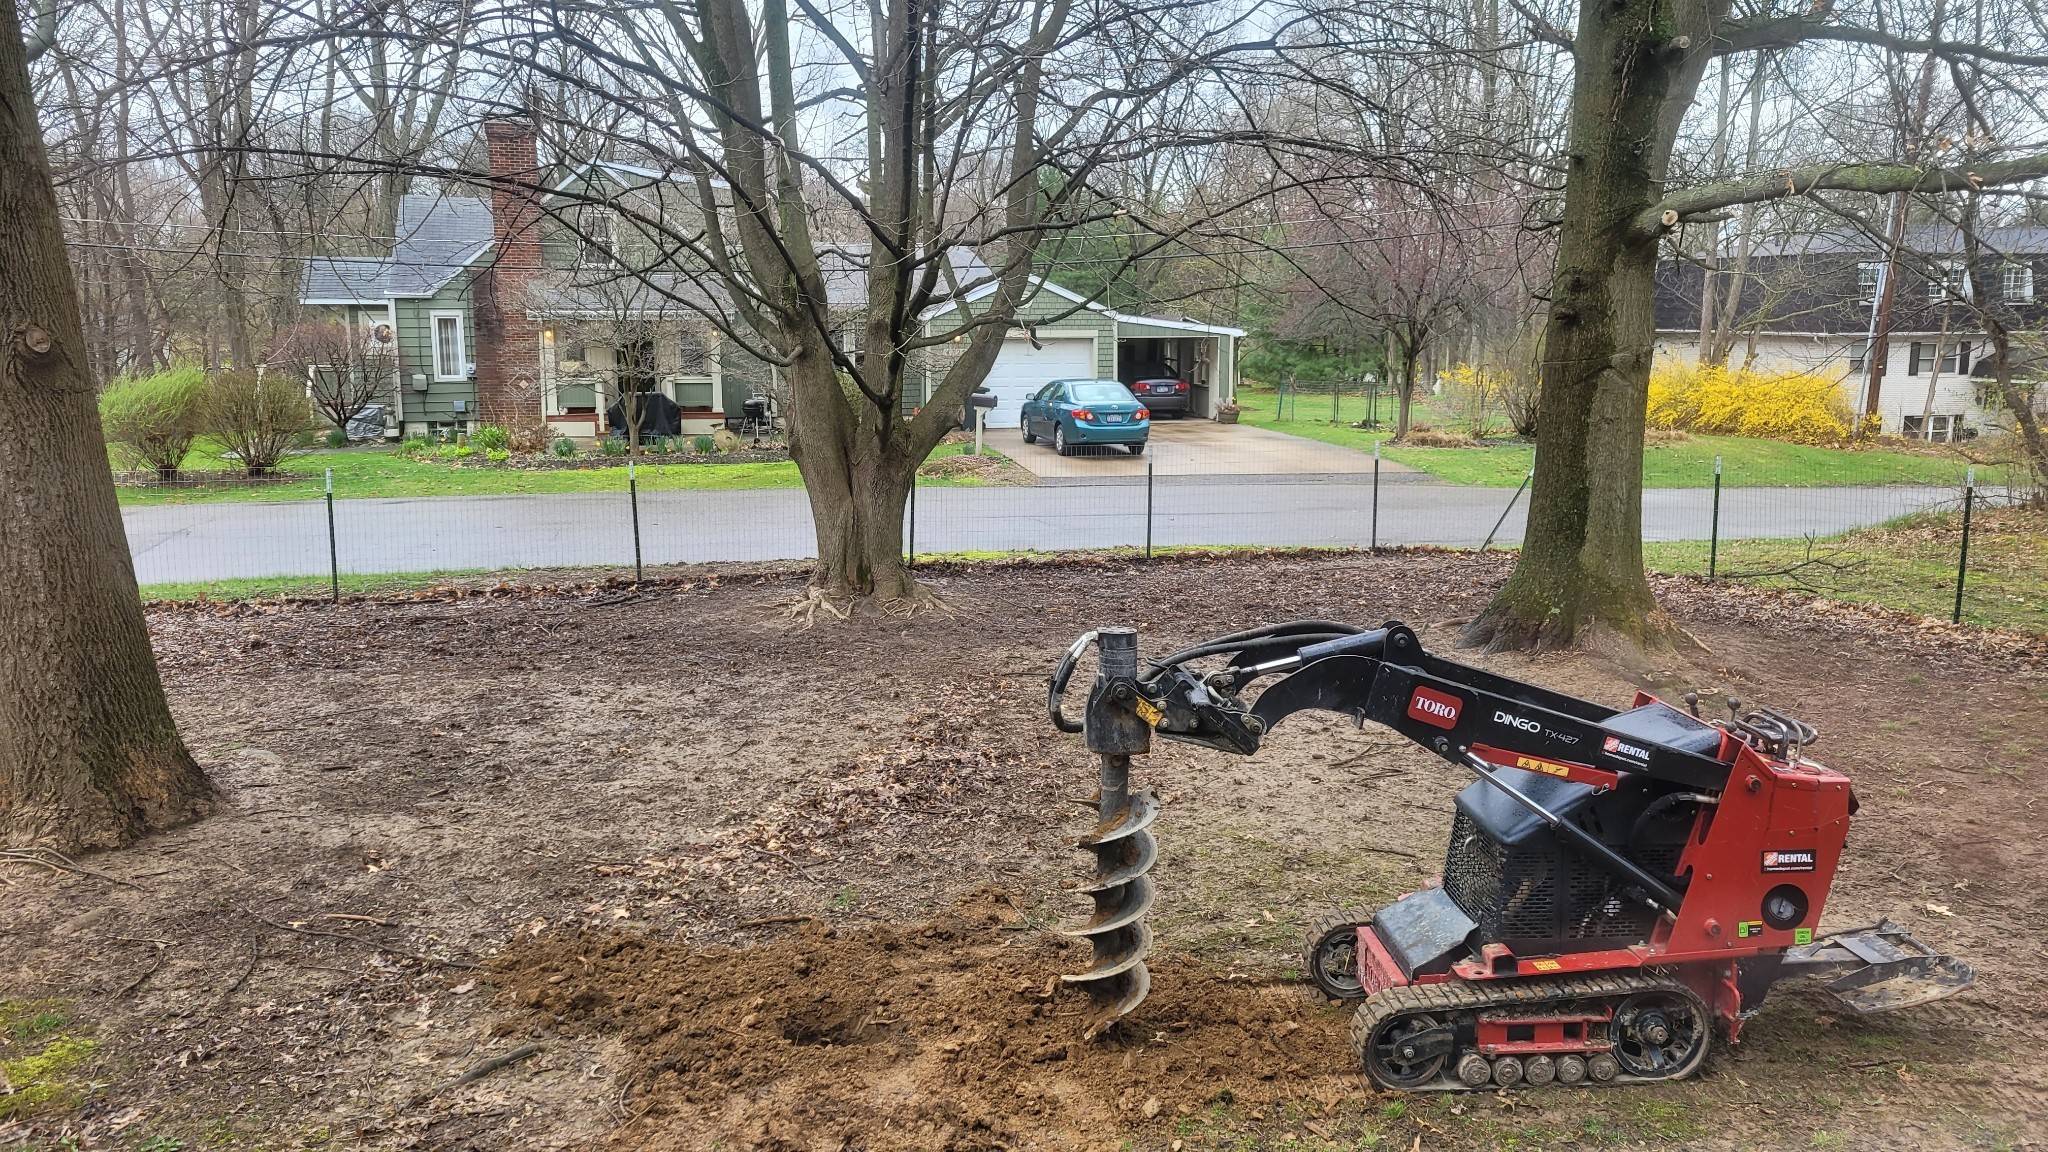 katiiie-lynn:Today was a productive day with lots of yard work to improve water drainage